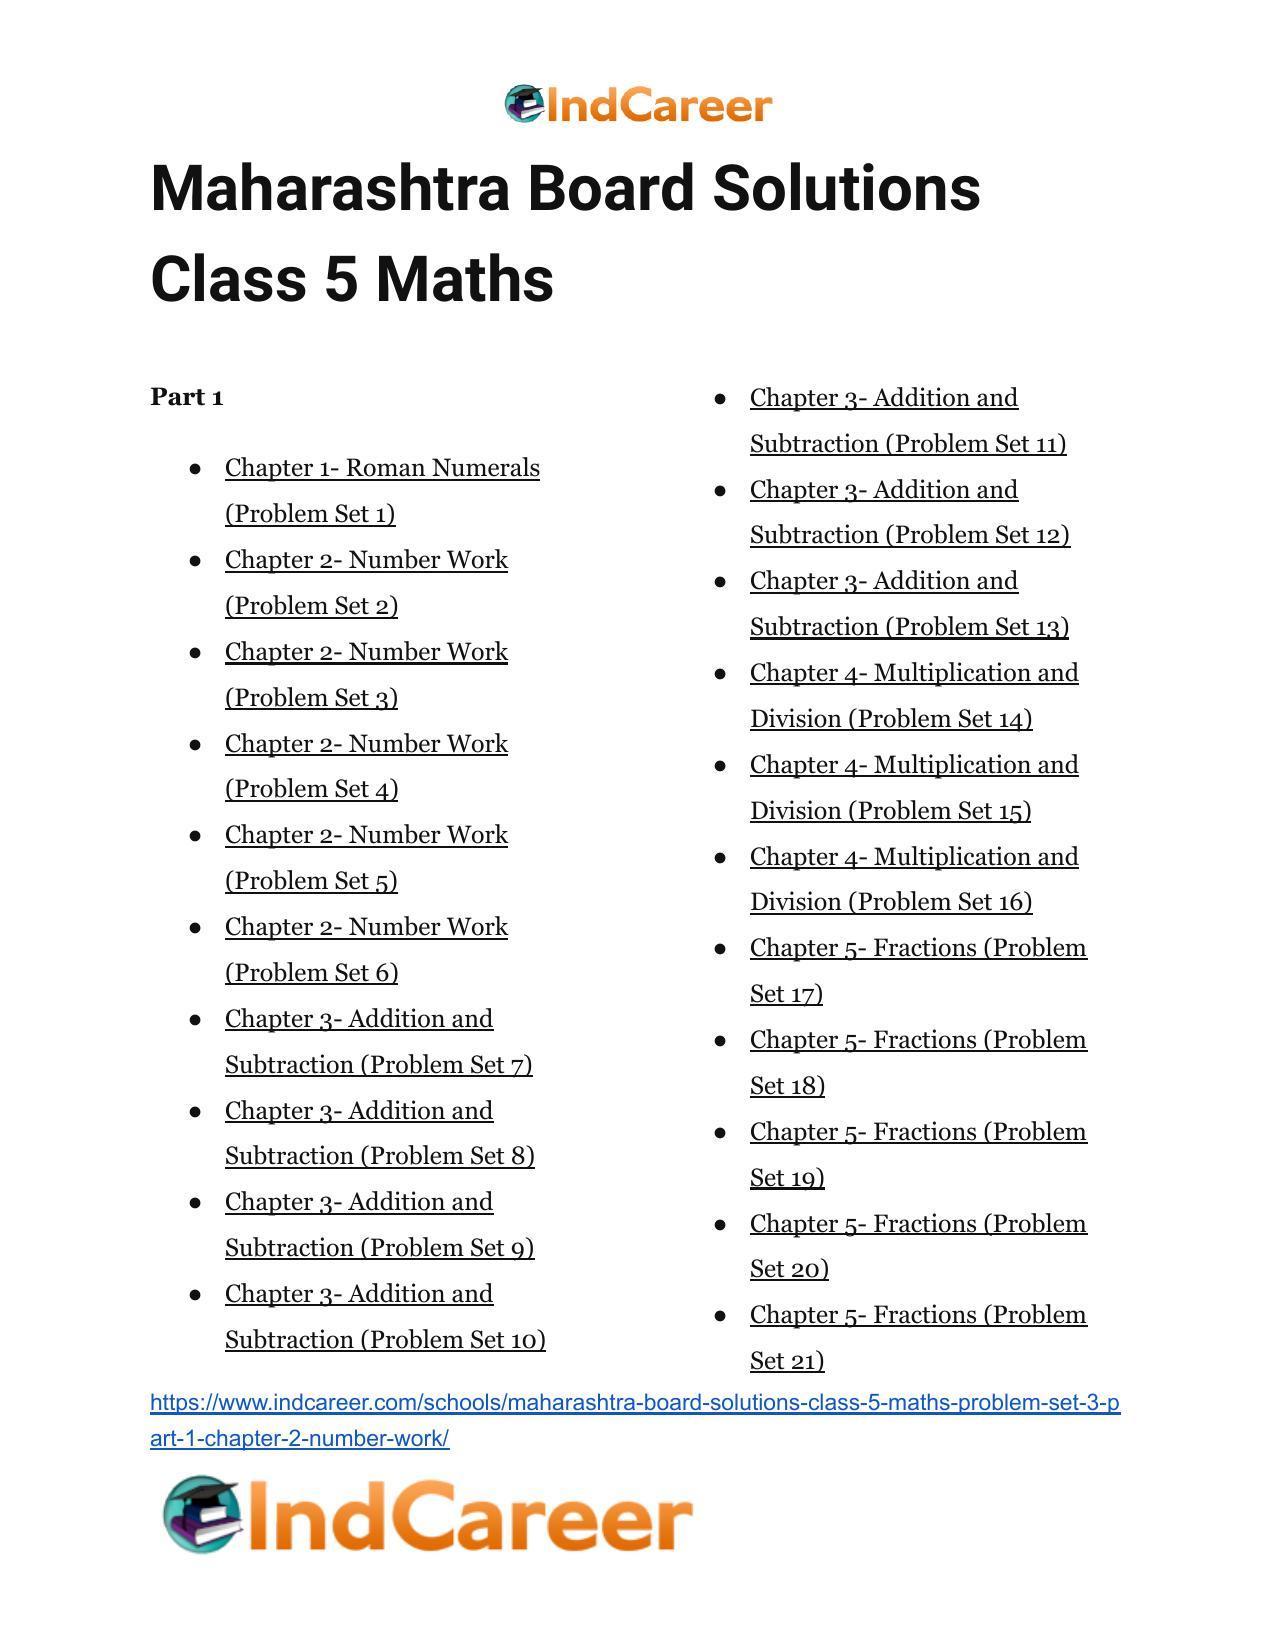 Maharashtra Board Solutions Class 5-Maths (Problem Set 3) - Part 1: Chapter 2- Number Work - Page 7